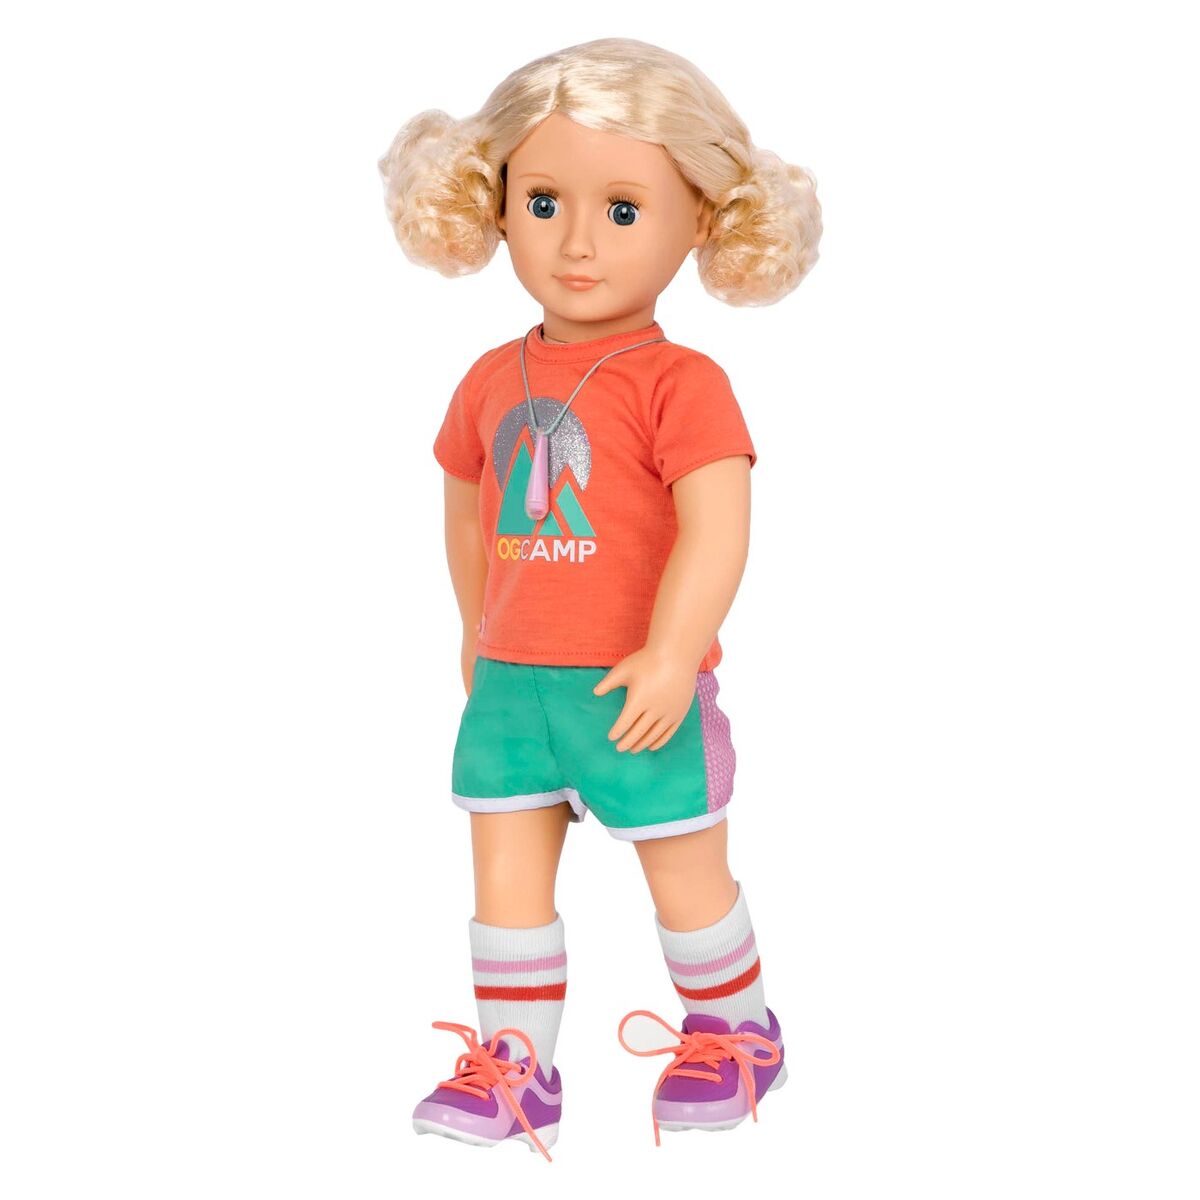 Summer Camp Outfit | Our Generation Dolls Wikia | Fandom